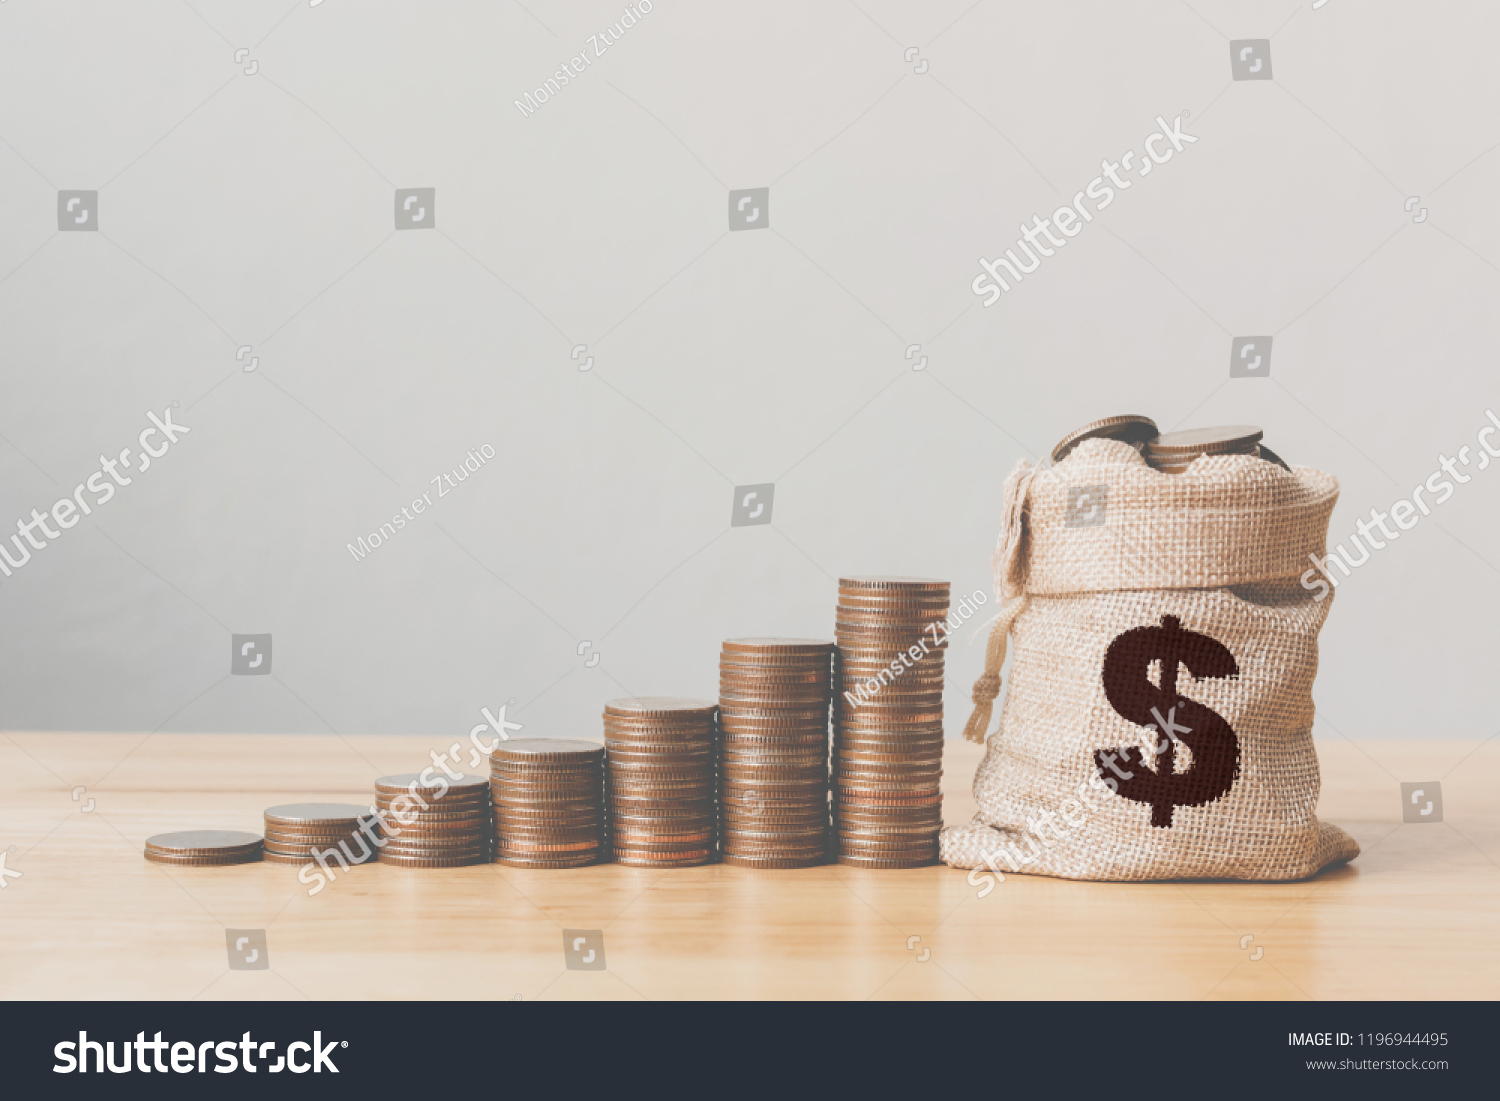 Coins in money bag with coin stack step growing growth saving money, Concept finance business investment #1196944495